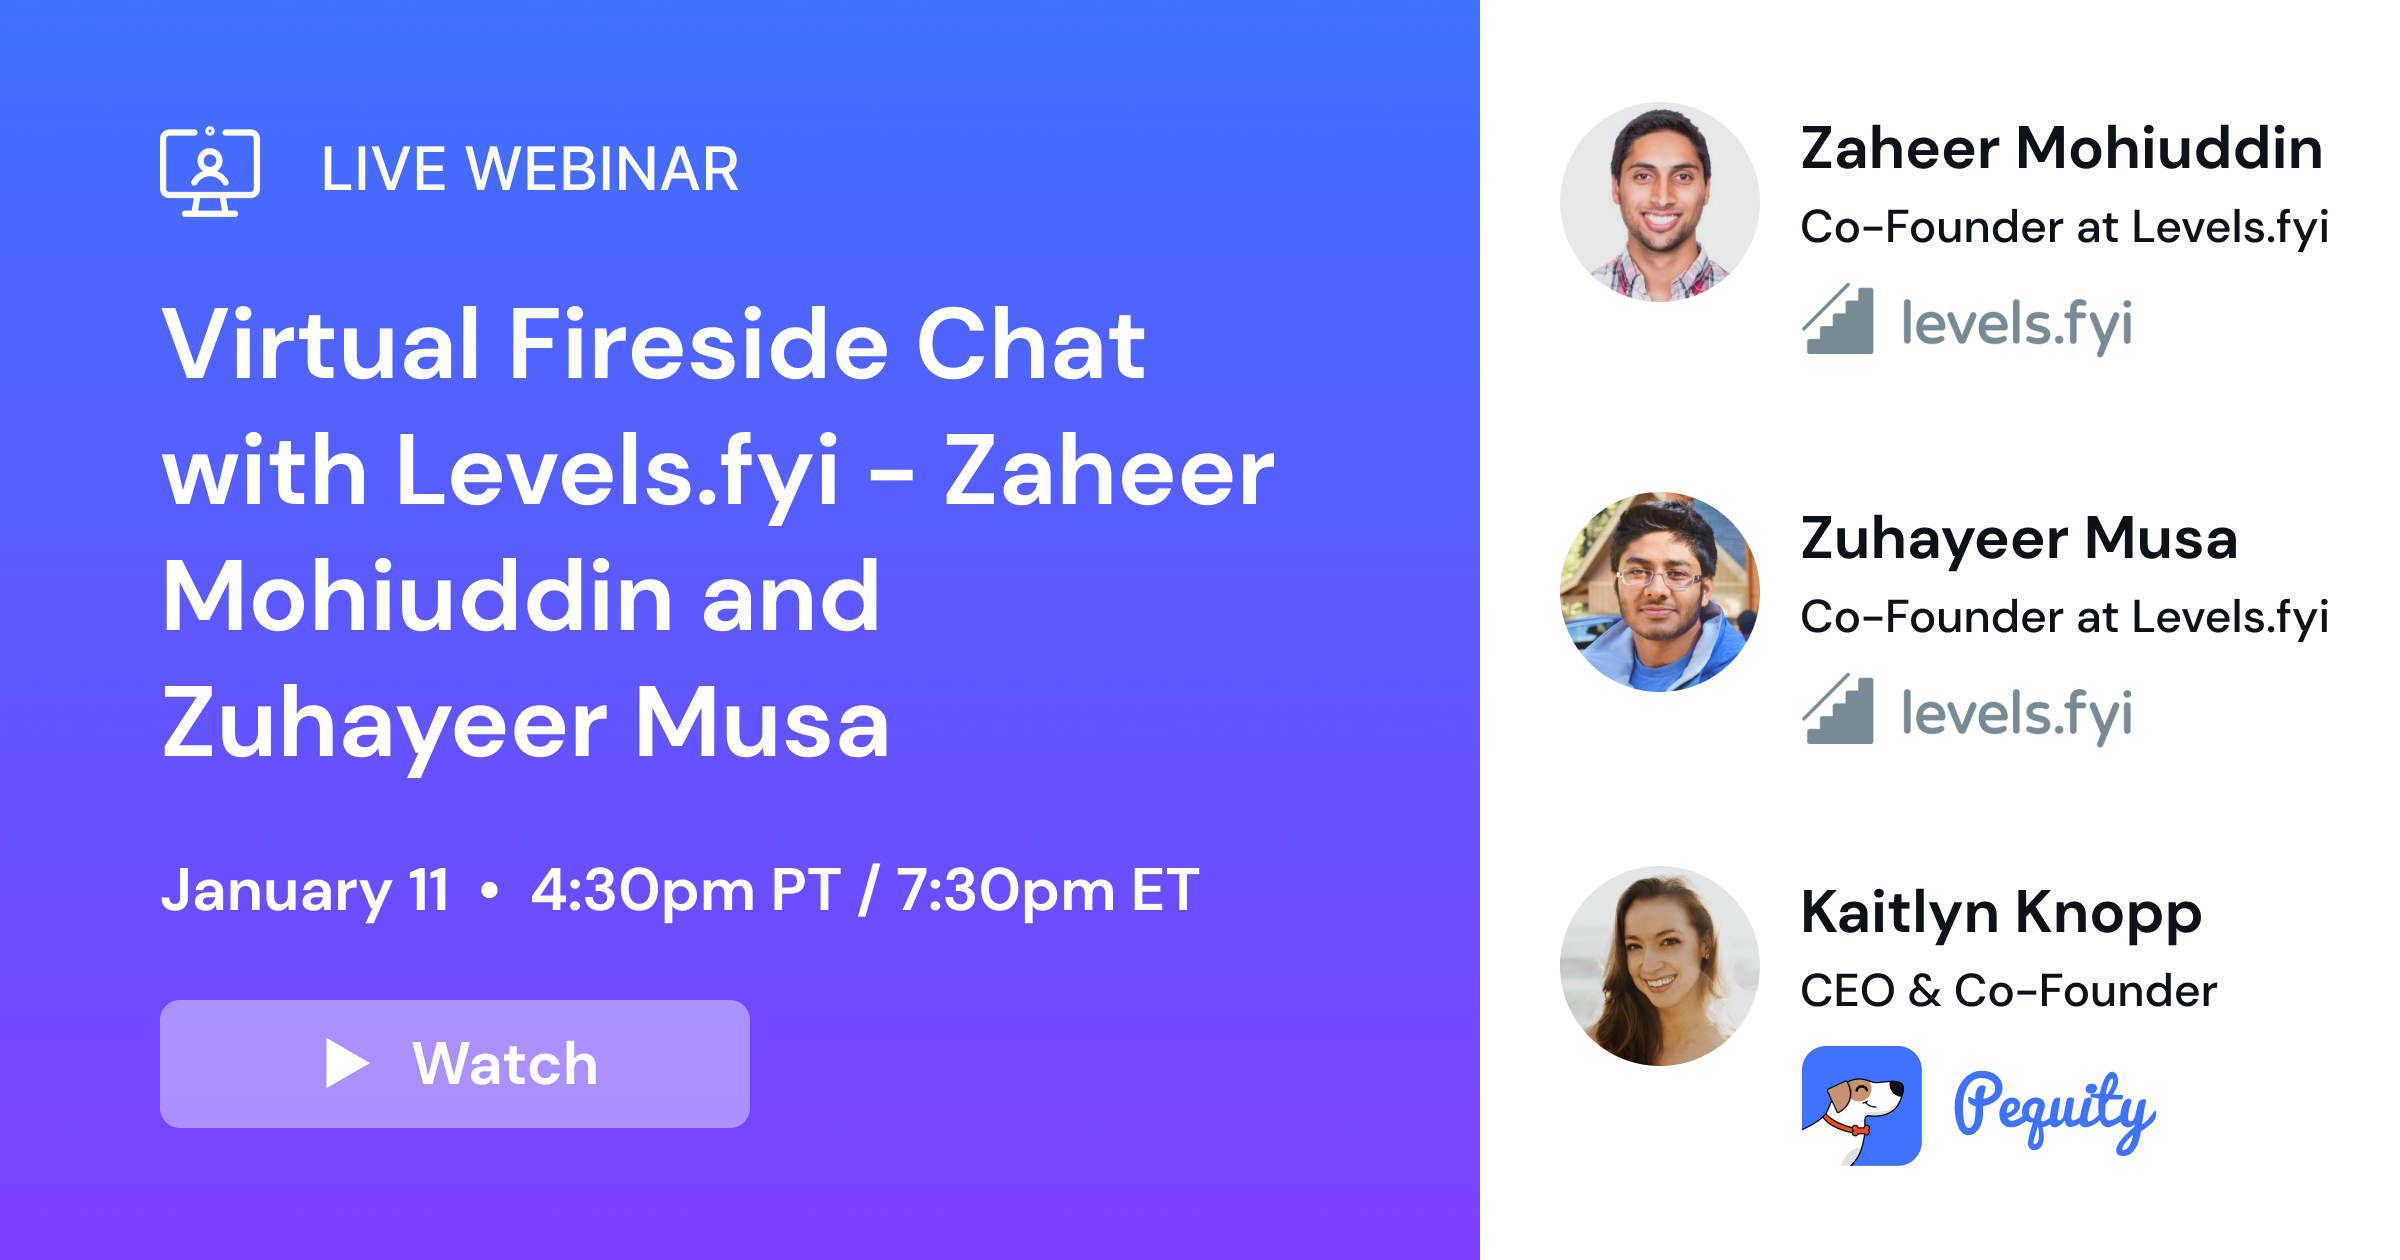 Fireside chat with Levels.fyi founders - Zaheer Mohiuddin and Zuhayeer Musa